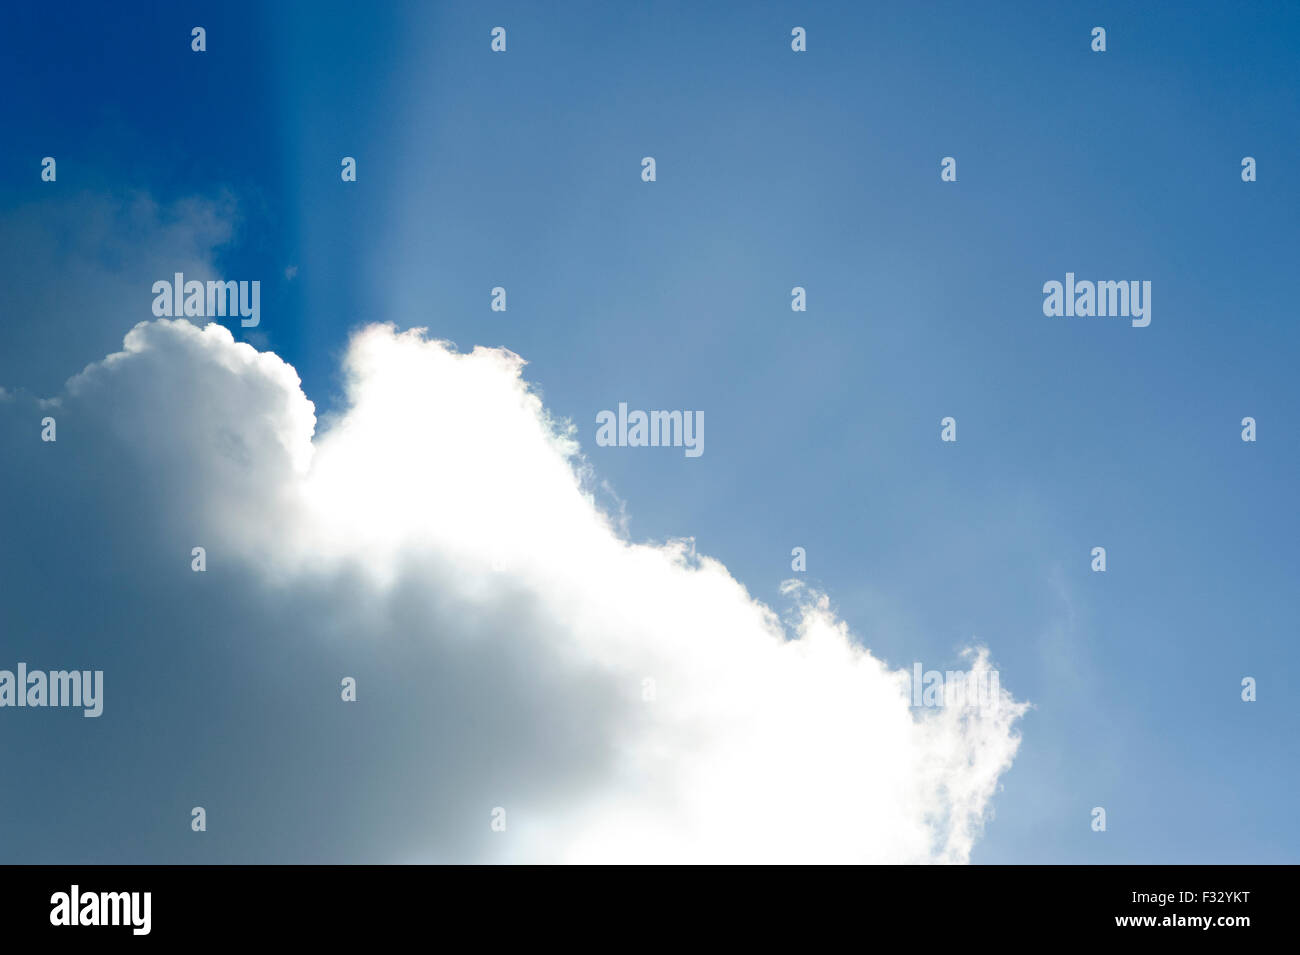 large cloud against blue sky with shafts of sunlight shining from behind Stock Photo